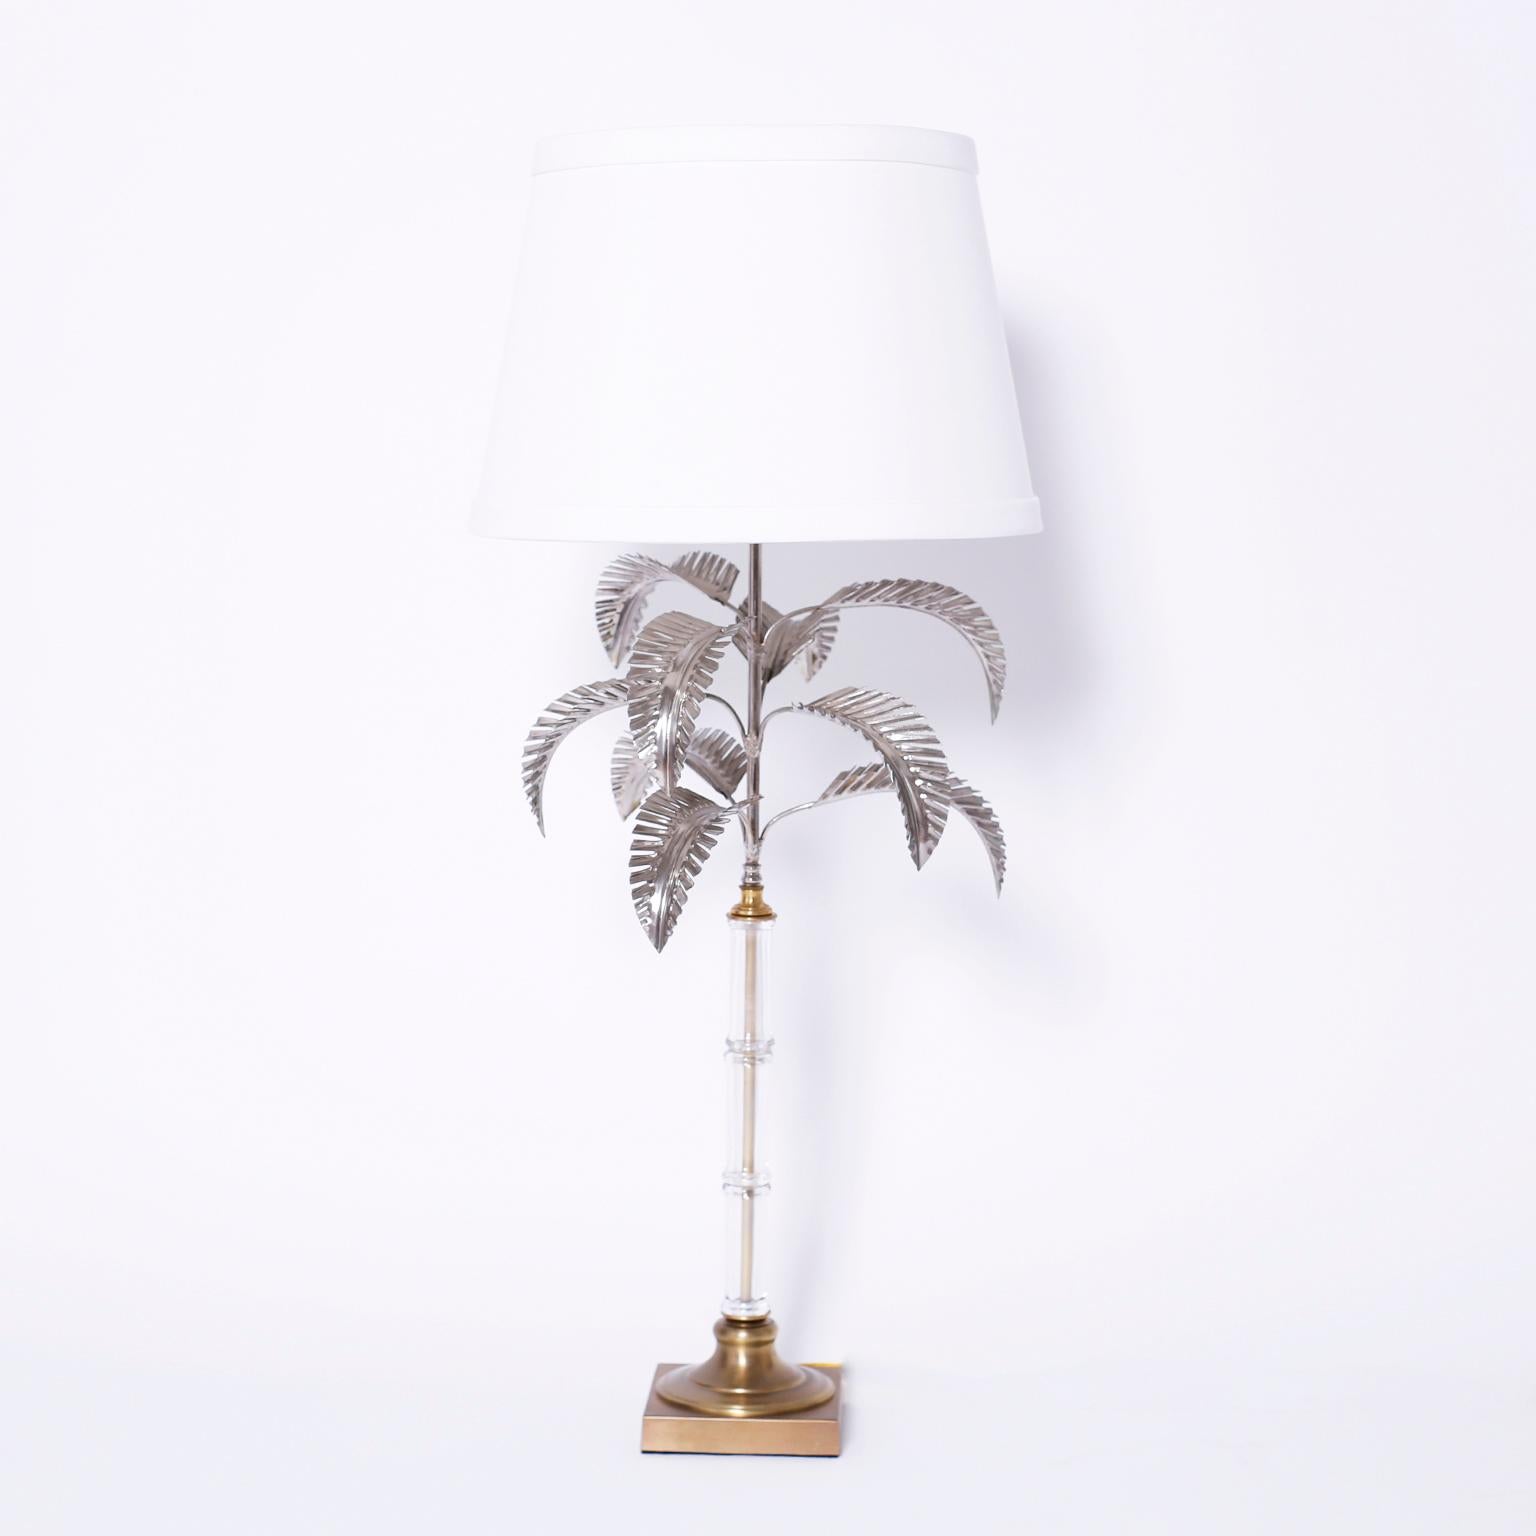 Pair of midcentury palm tree table lamps with stylized silvered metal palm leaves, faux bamboo glass stems, and Classic brass bases.
  